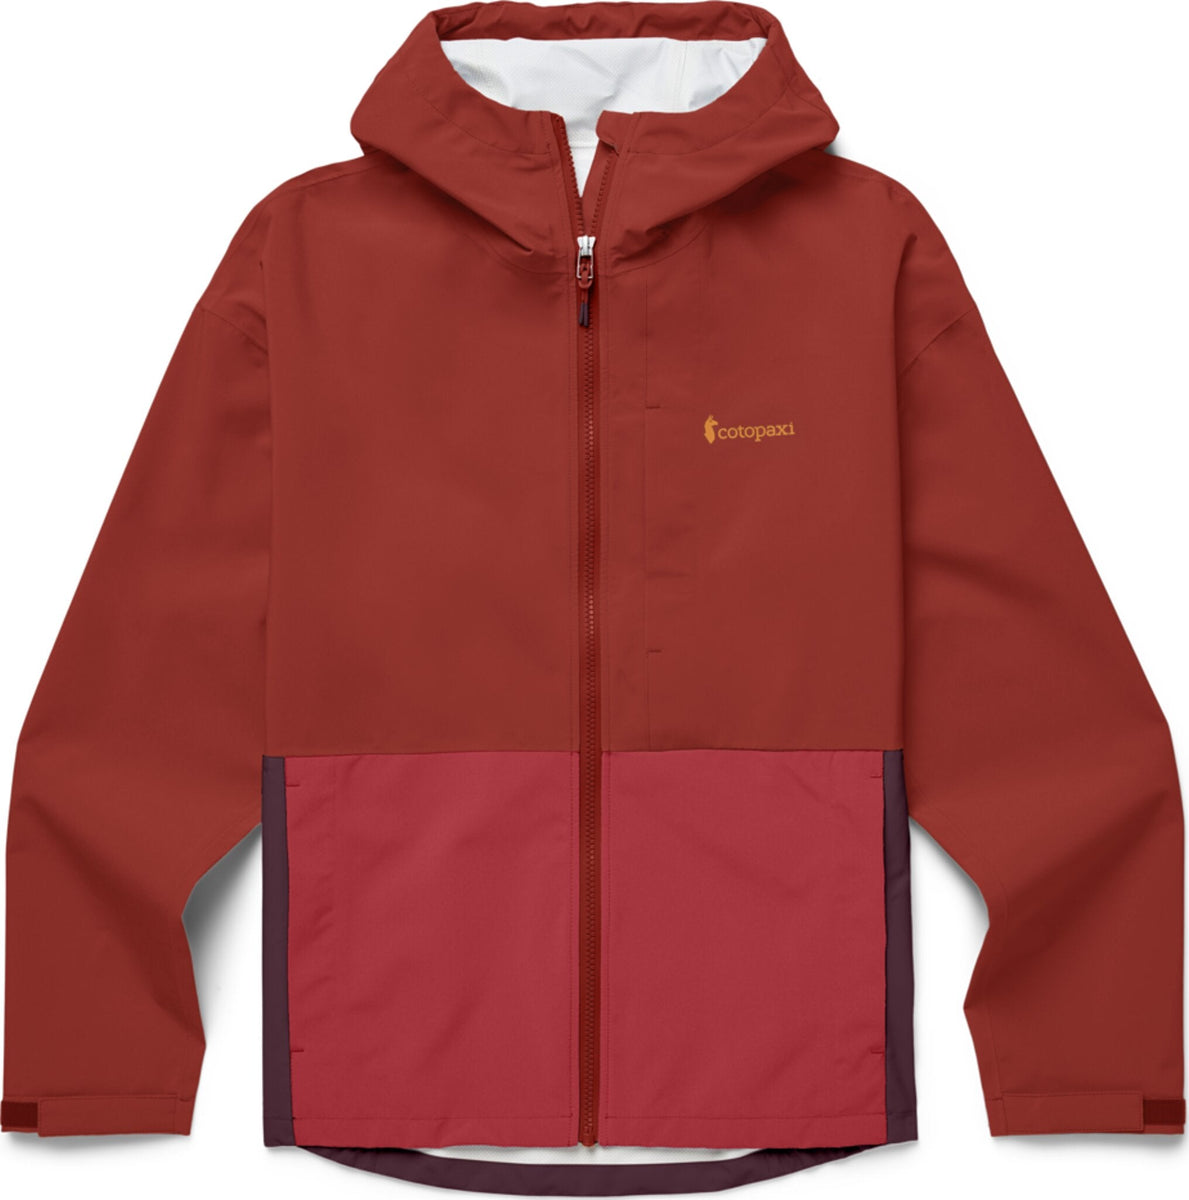 Women's Cotopaxi Clothing Sale & Clearance